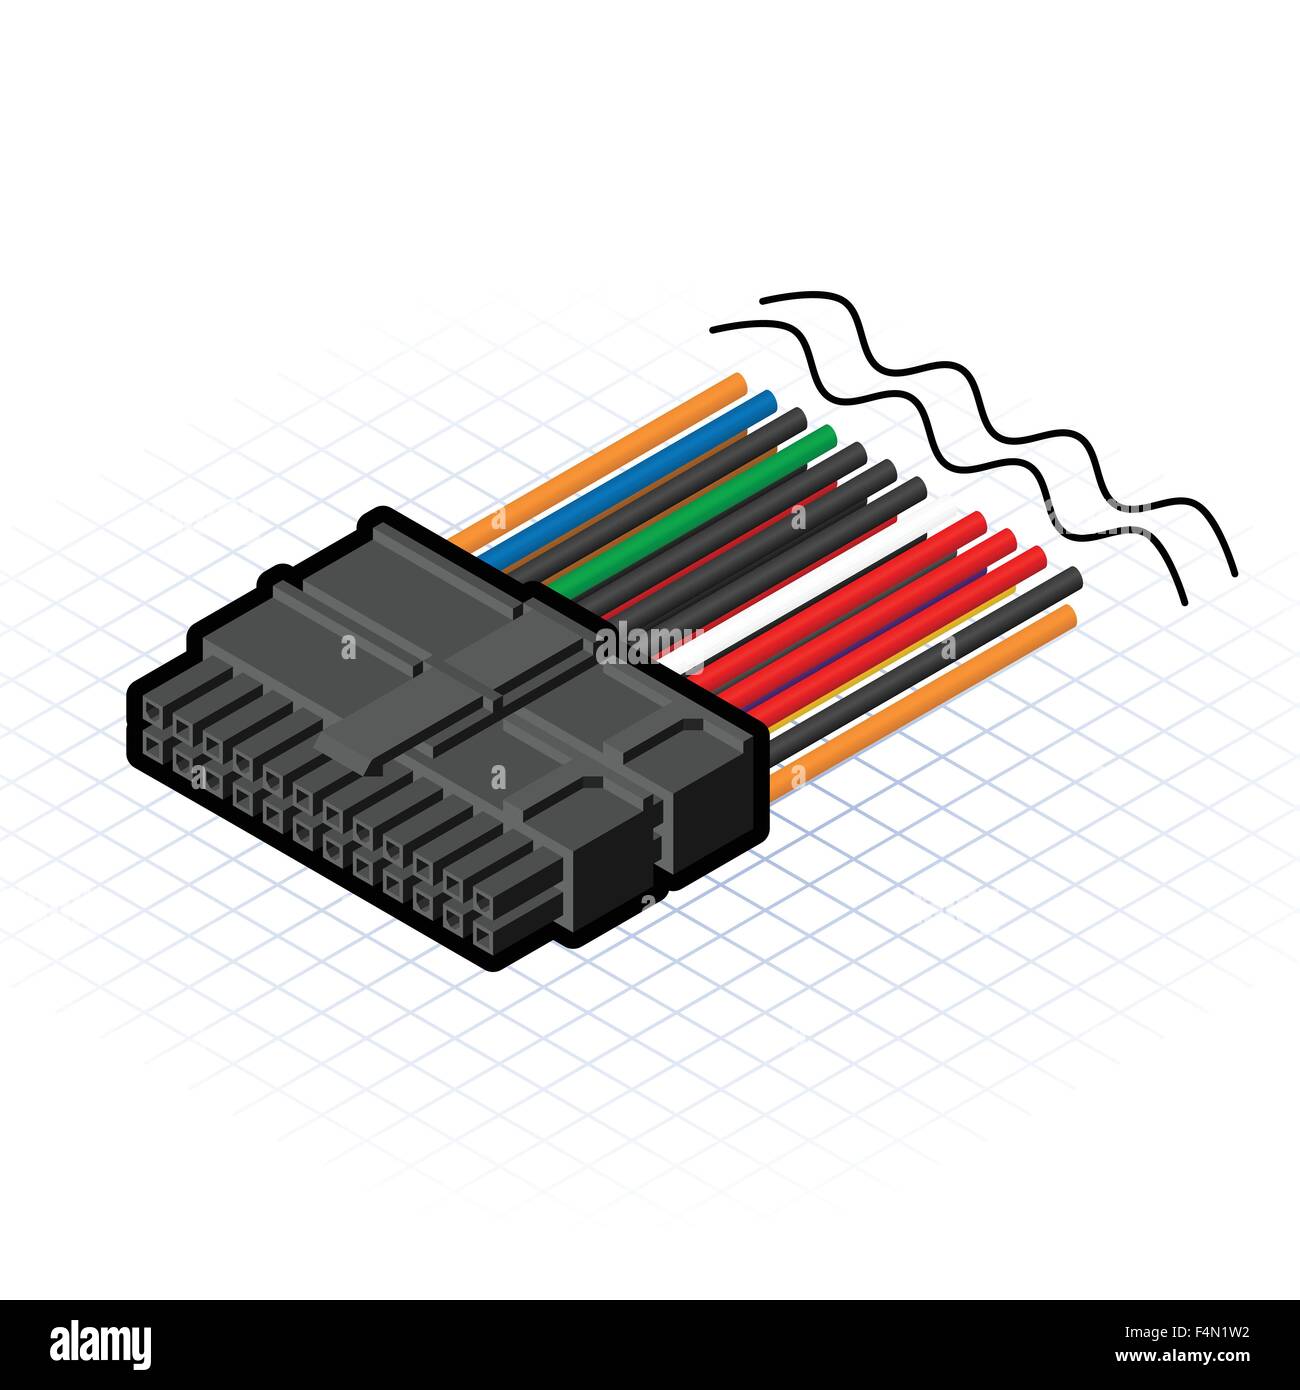 Isometric 24 Pin Connector Stock Vector